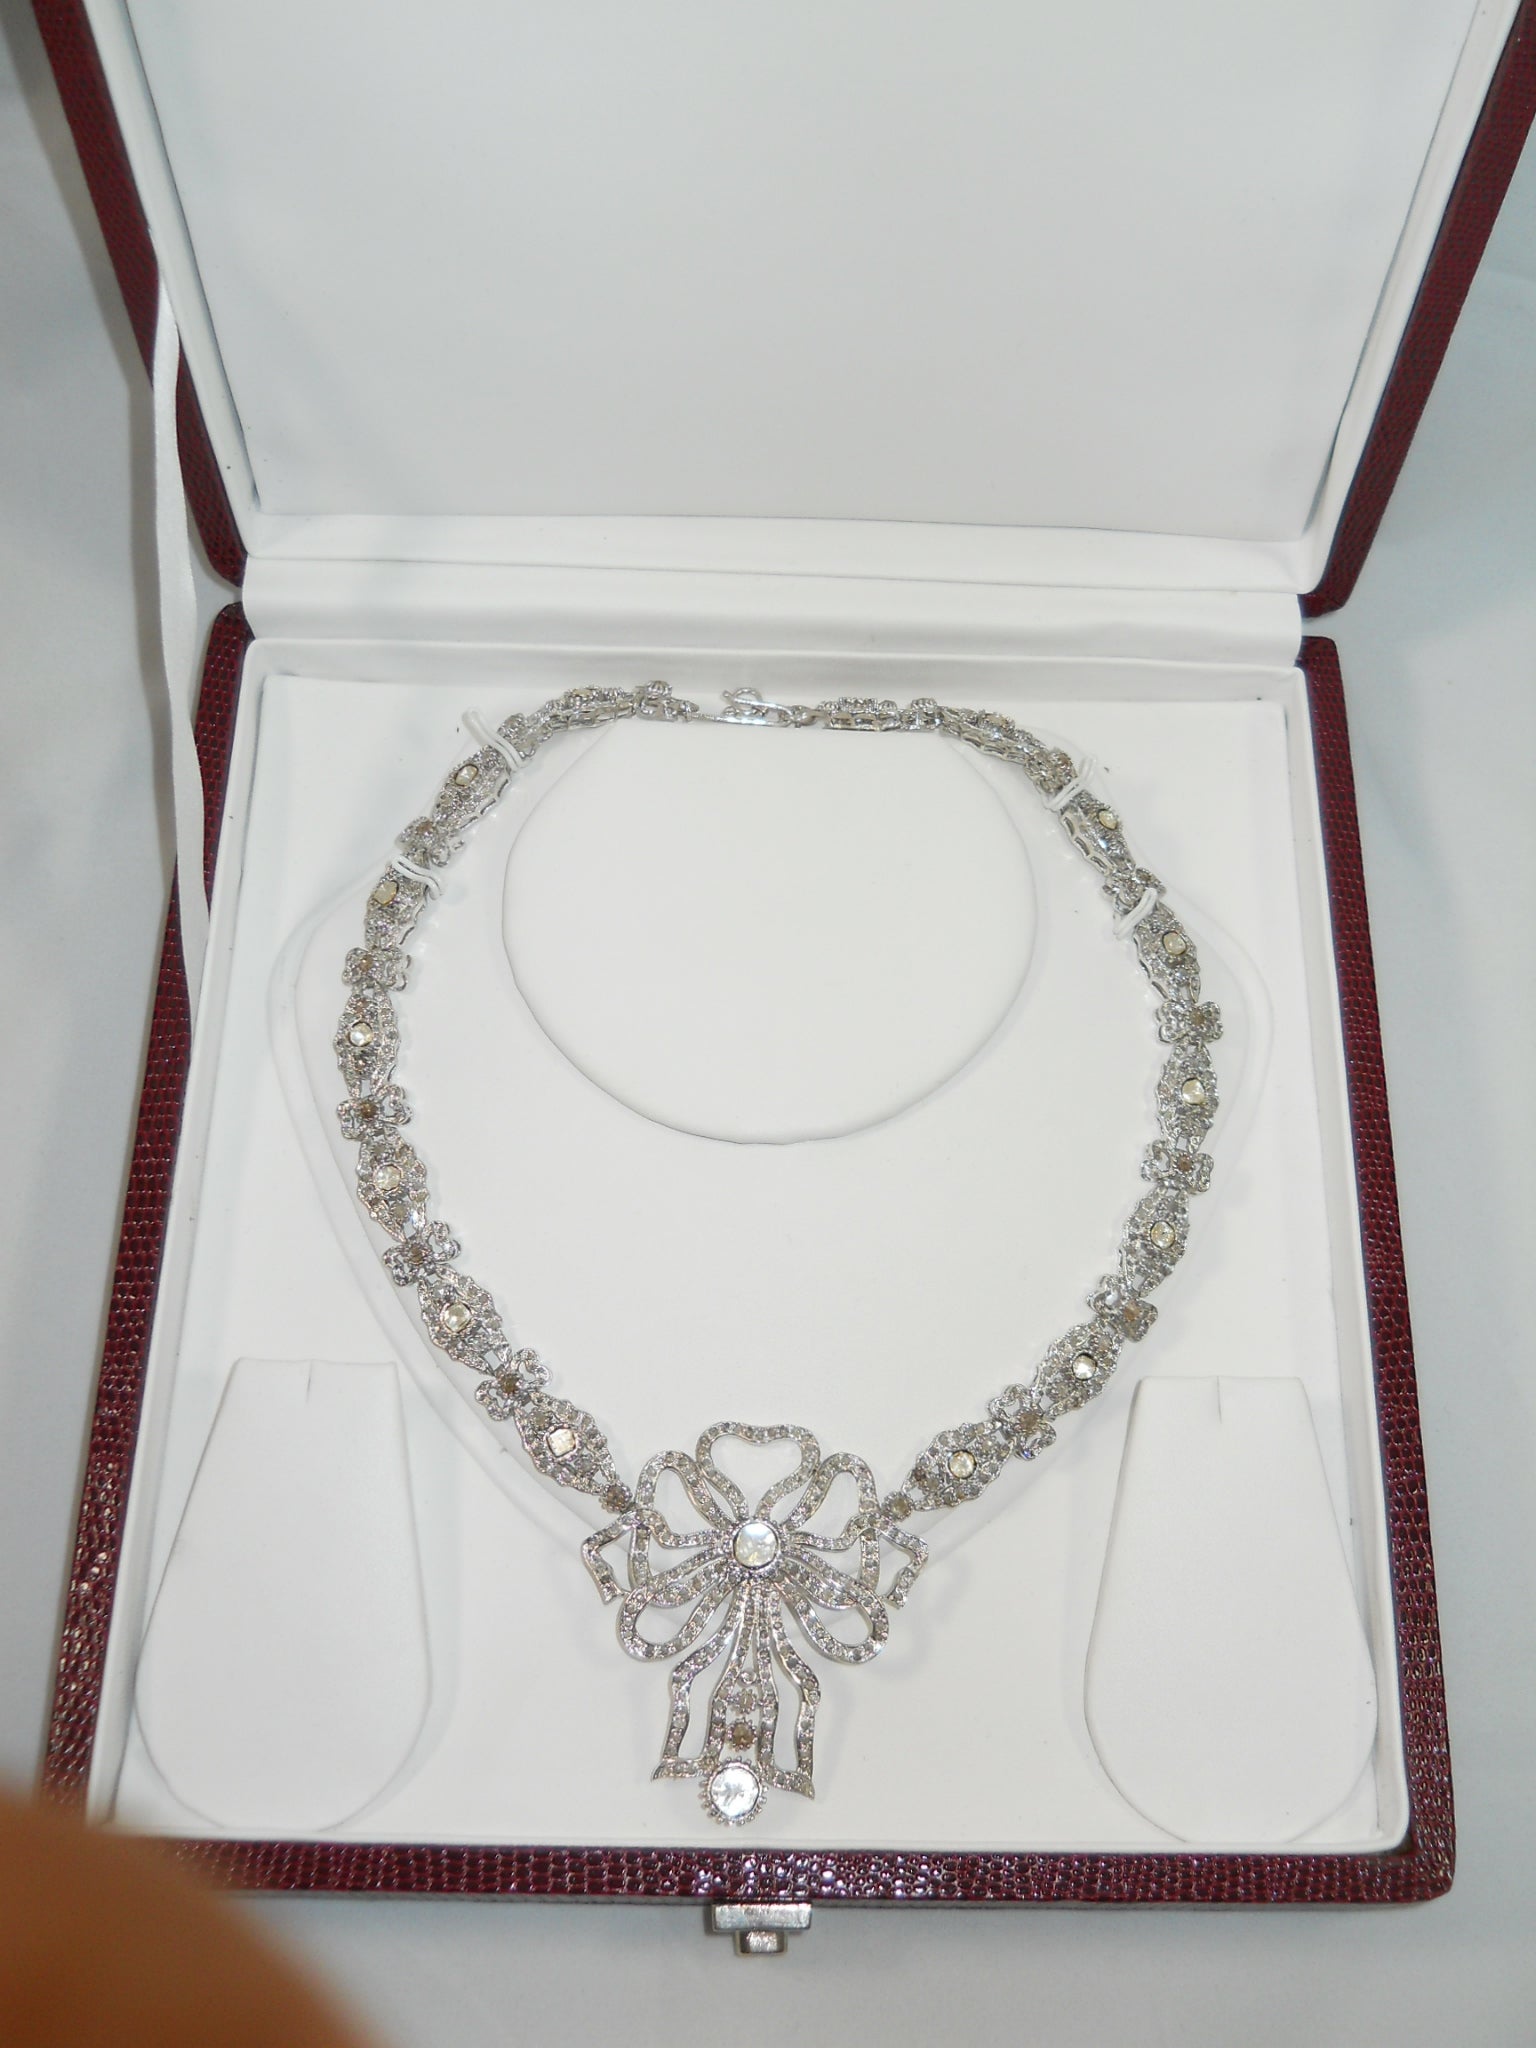 This gorgeous ribbon bow uncut rose cut diamond silver necklace is unique in itself. It has been created by the fine artisans using Natural real Uncut Diamond and real rose cut diamonds. The diamonds have been set in such a way that their luster